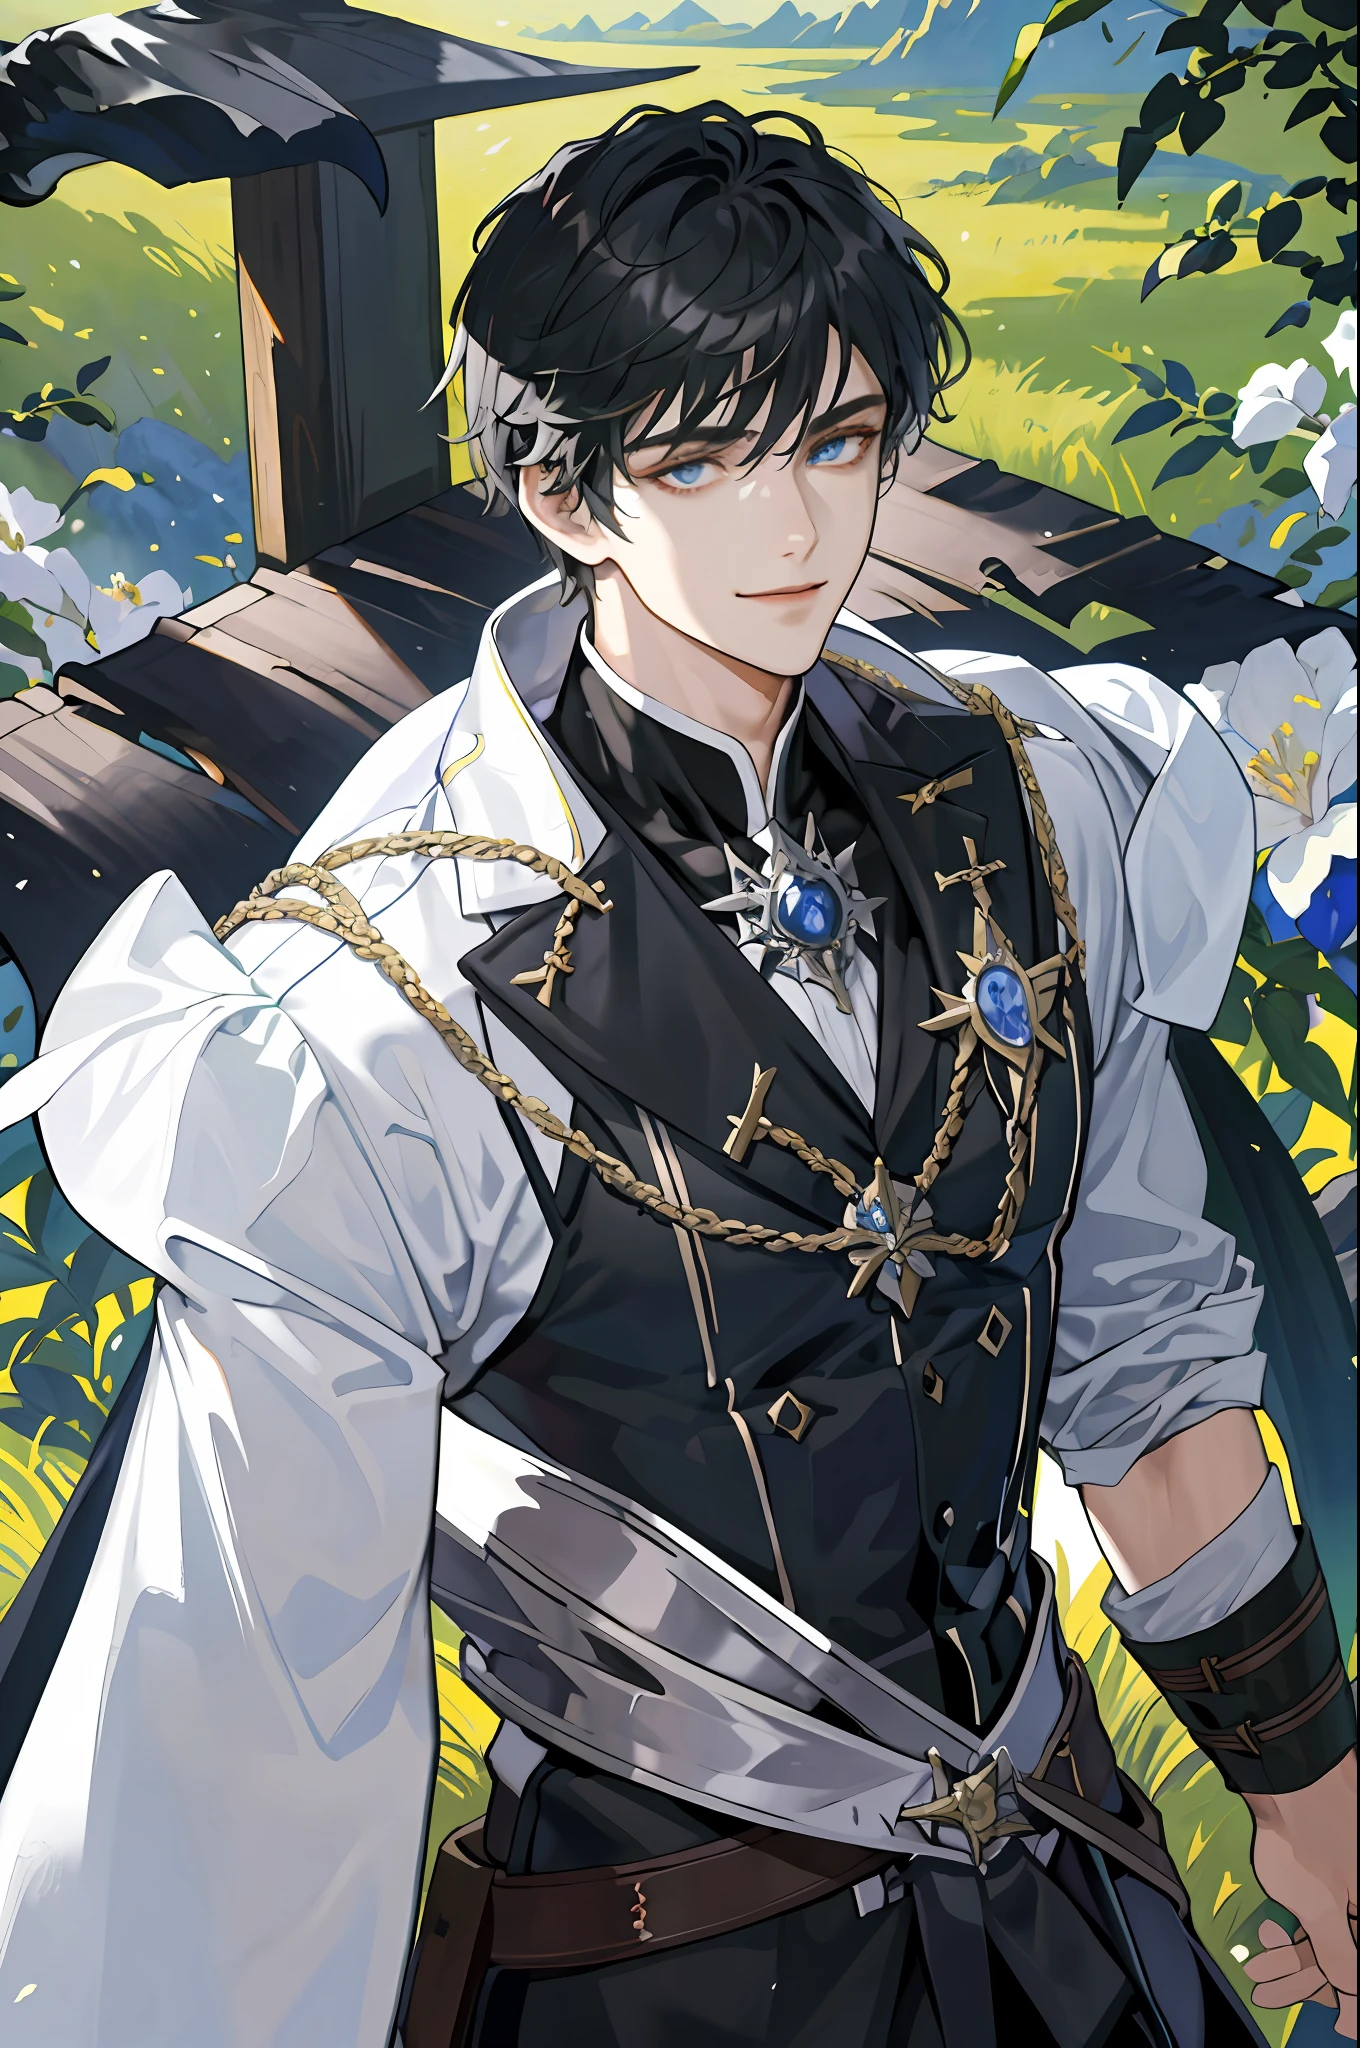 ((Masterpiece: 1.2, best quality)), ((2 men)), nice middle, muscular, valiant, strong, black knight, short black hair, uniform, white robe, scar on right eye, black armor, fantasy, forest, blooming flowers, sunlight, fantastic light and shadow, landscape, highly detailed face, portrait, smile